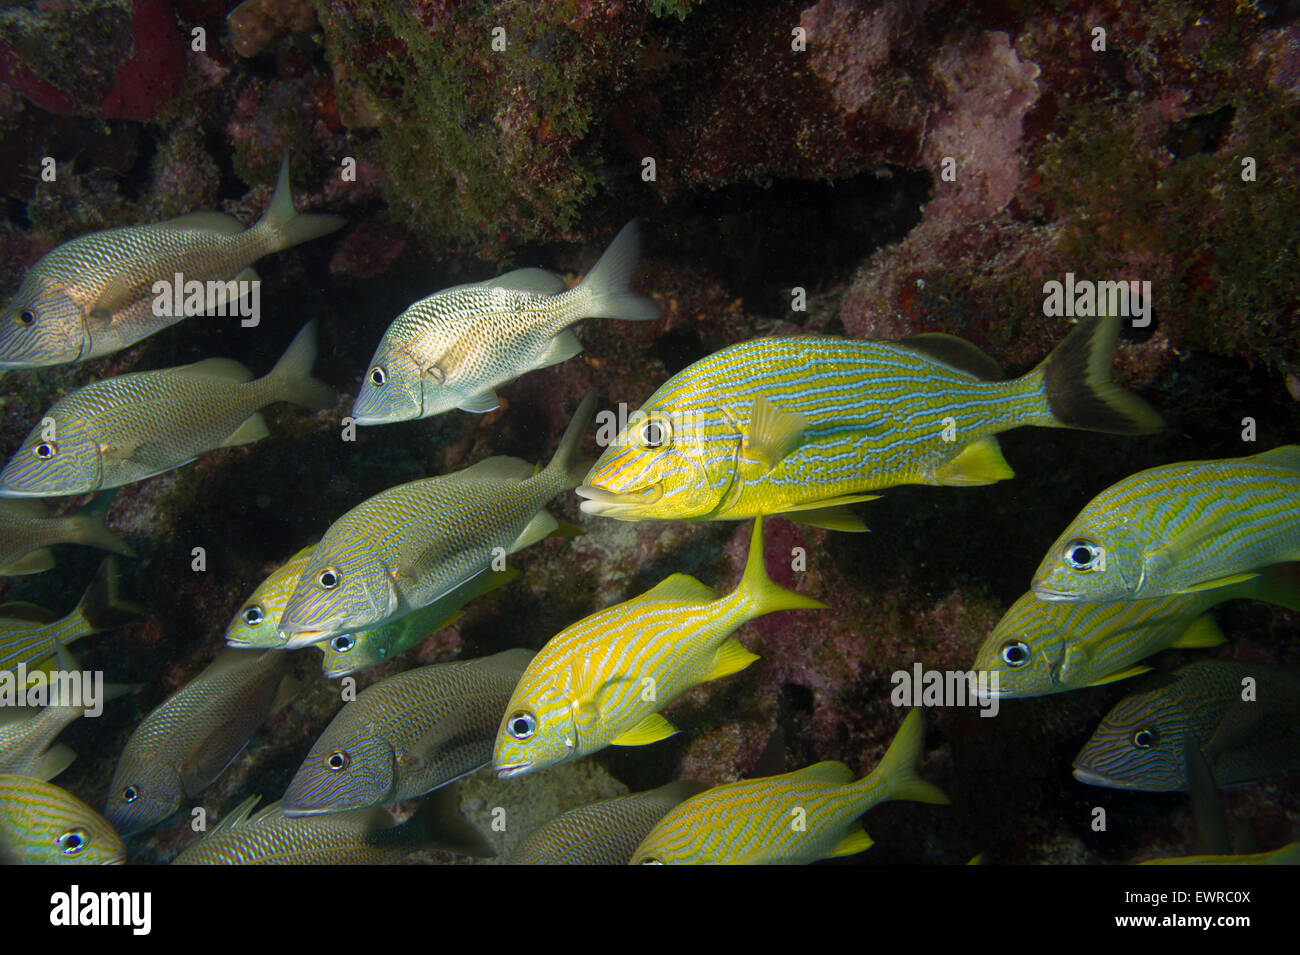 Schooling grunts on a coral reef in Key Largo. Stock Photo